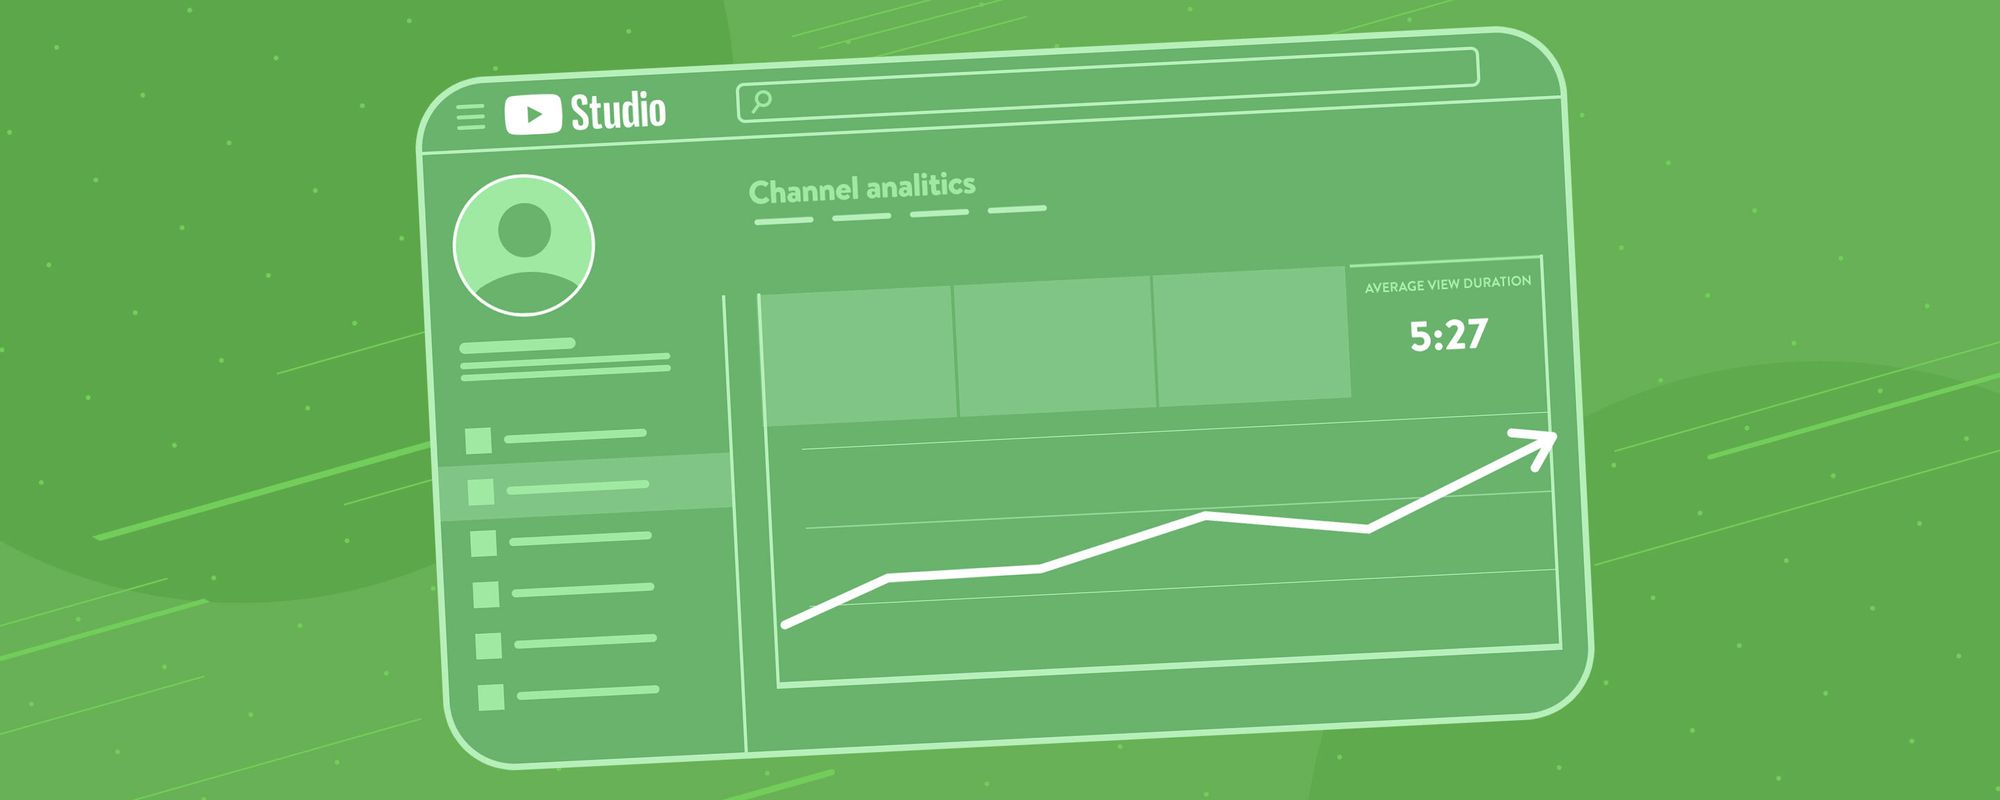 Illustration of the YouTube Studio interface showing average view duration.